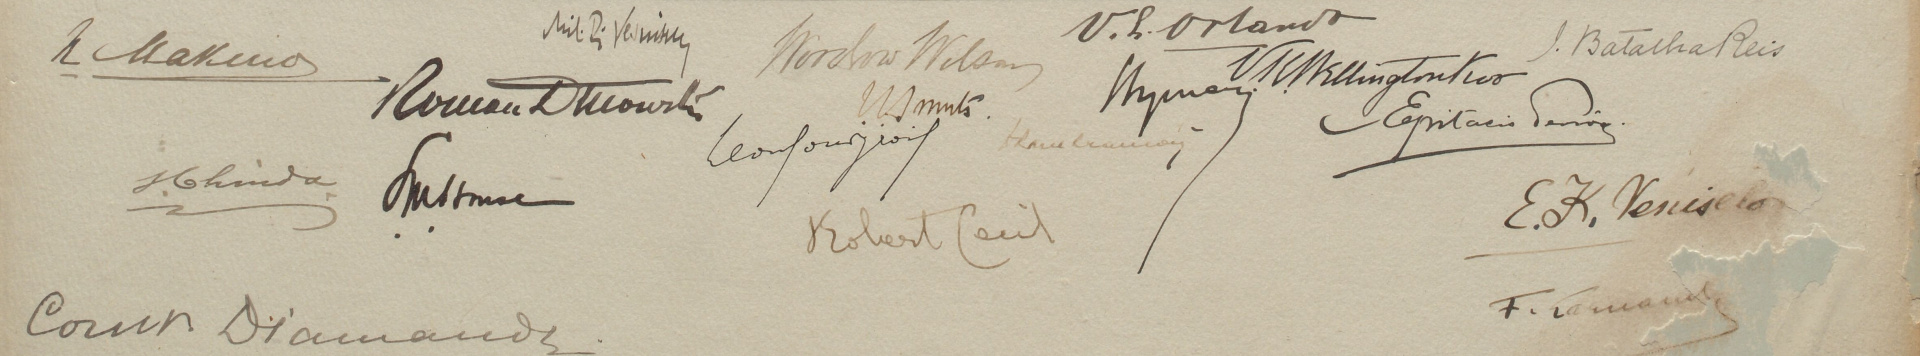 Signature of the members of the commission on the League of Nations at the Paris Peace Conference